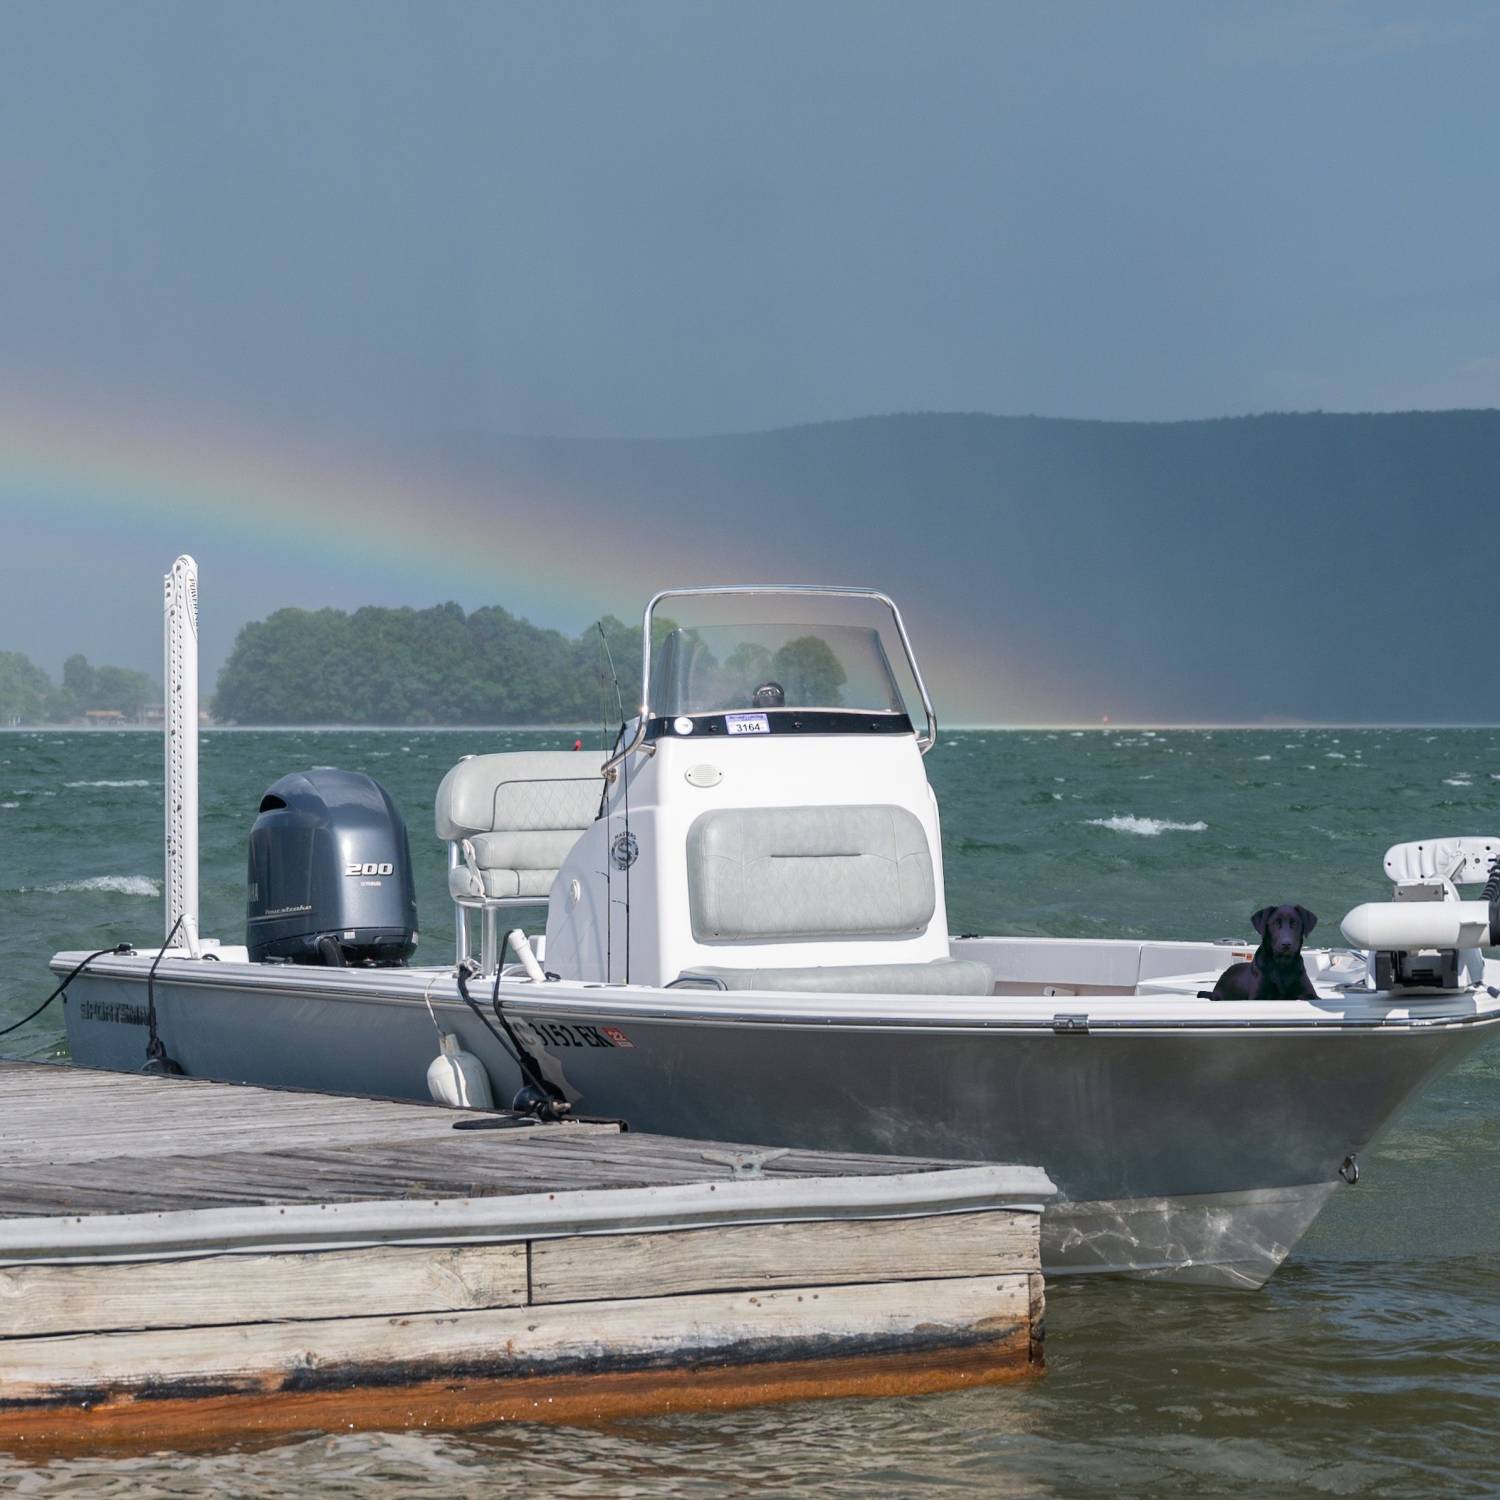 Storm rolled in with a rainbow so I got preacher to stay on the boat while I snapped a couple...